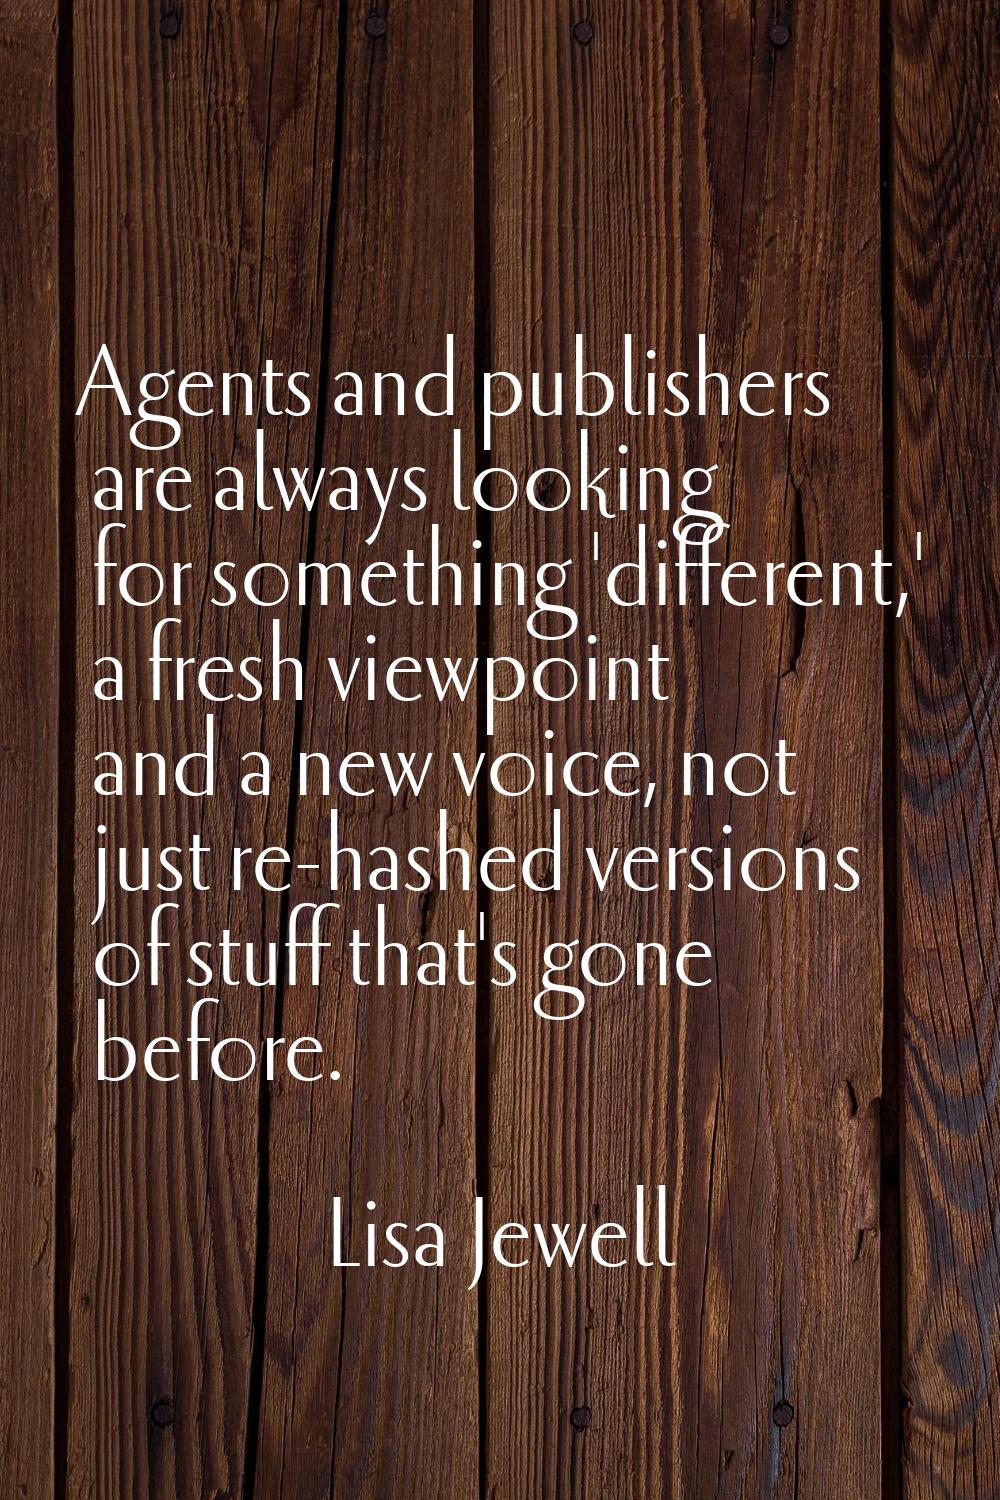 Agents and publishers are always looking for something 'different,' a fresh viewpoint and a new voi